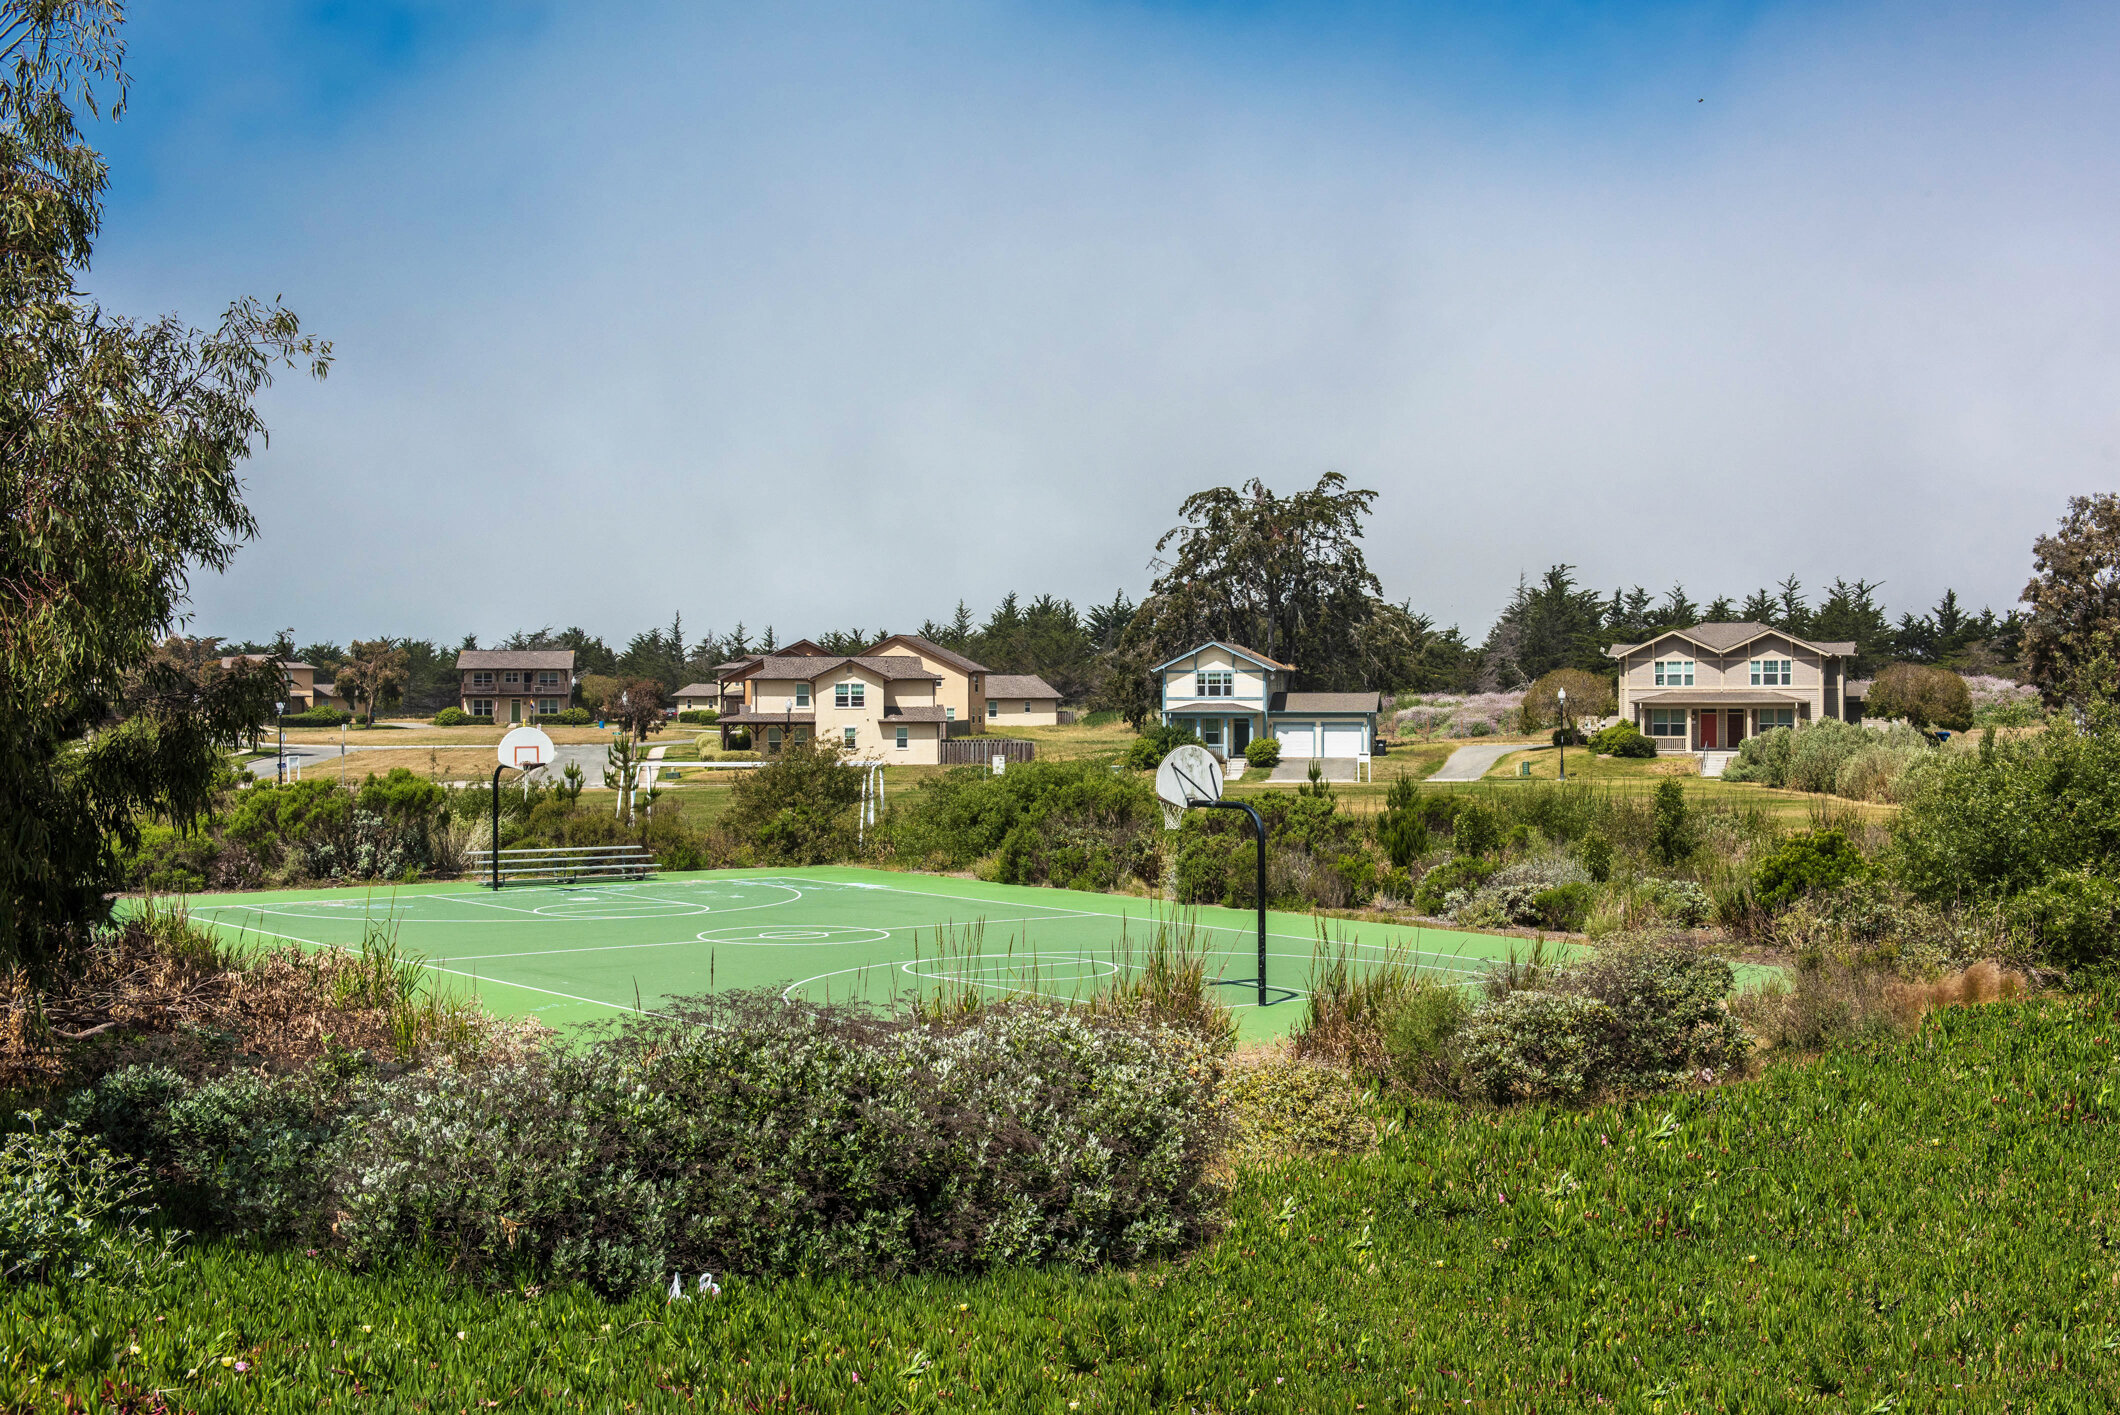 Enjoy sports courts across all neighborhoods in La Mesa Village and Fort Ord Village.